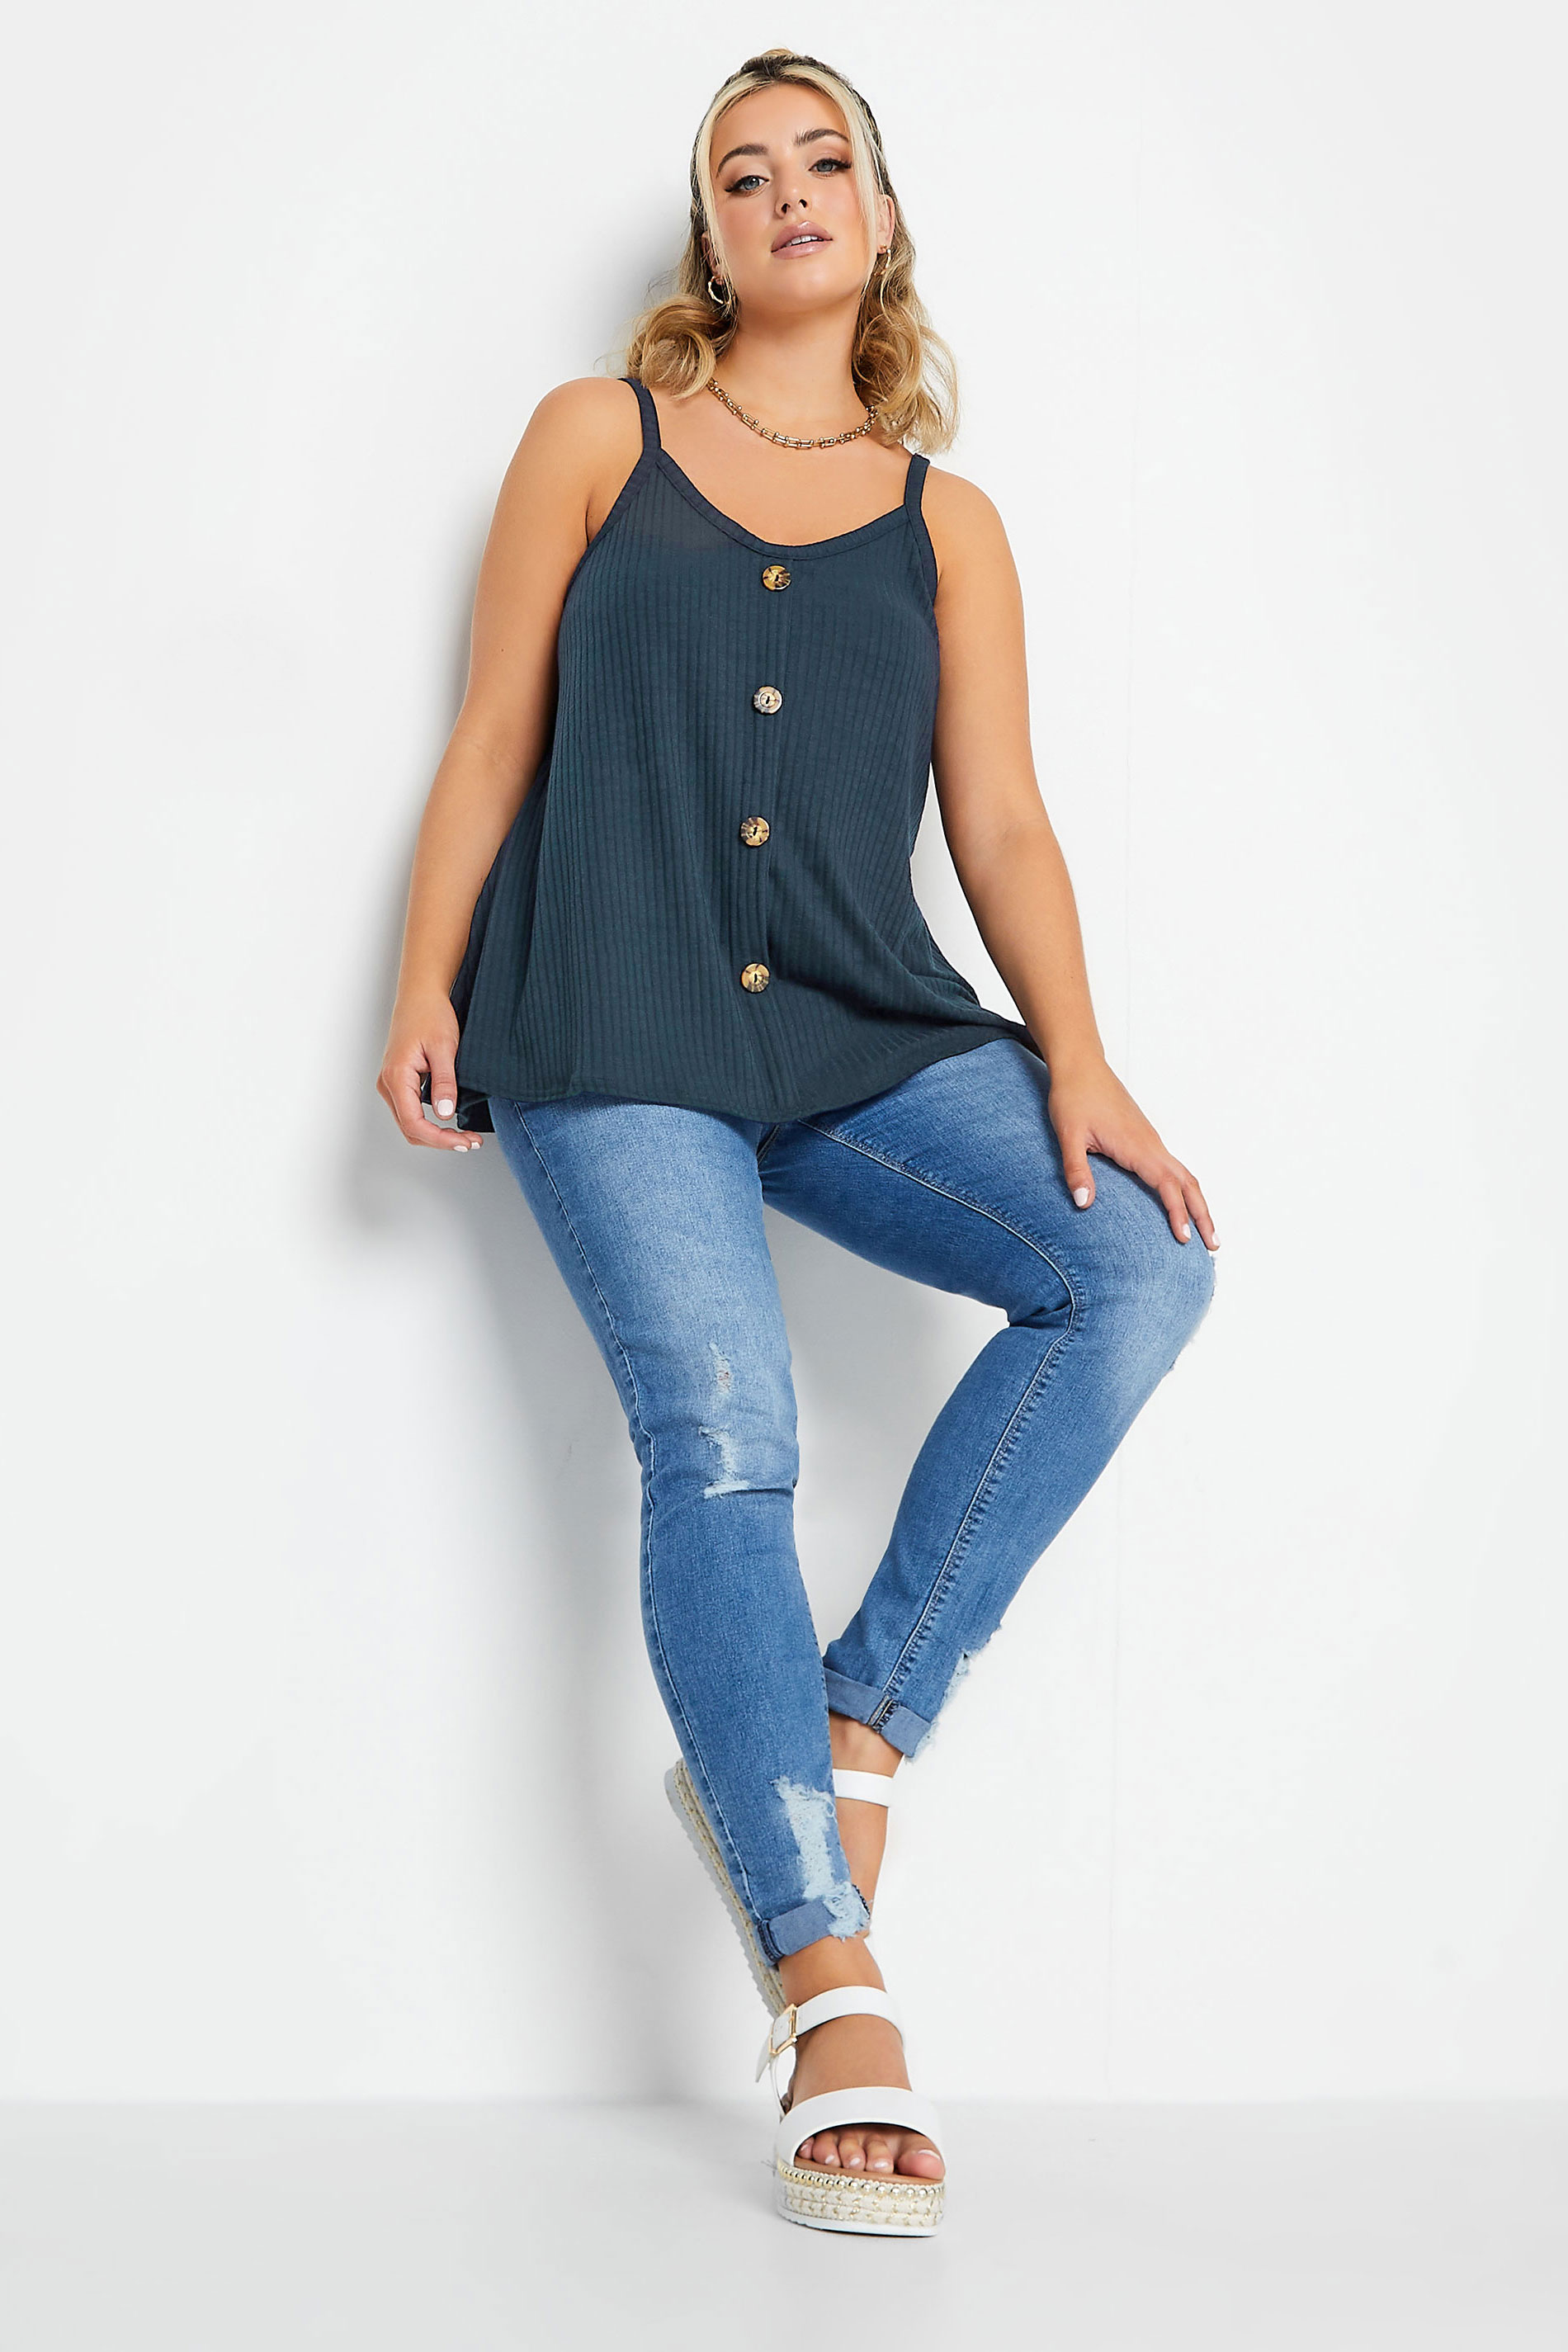 LIMITED COLLECTION Plus Size Navy Blue Ribbed Button Cami Vest Top | Yours Clothing 2